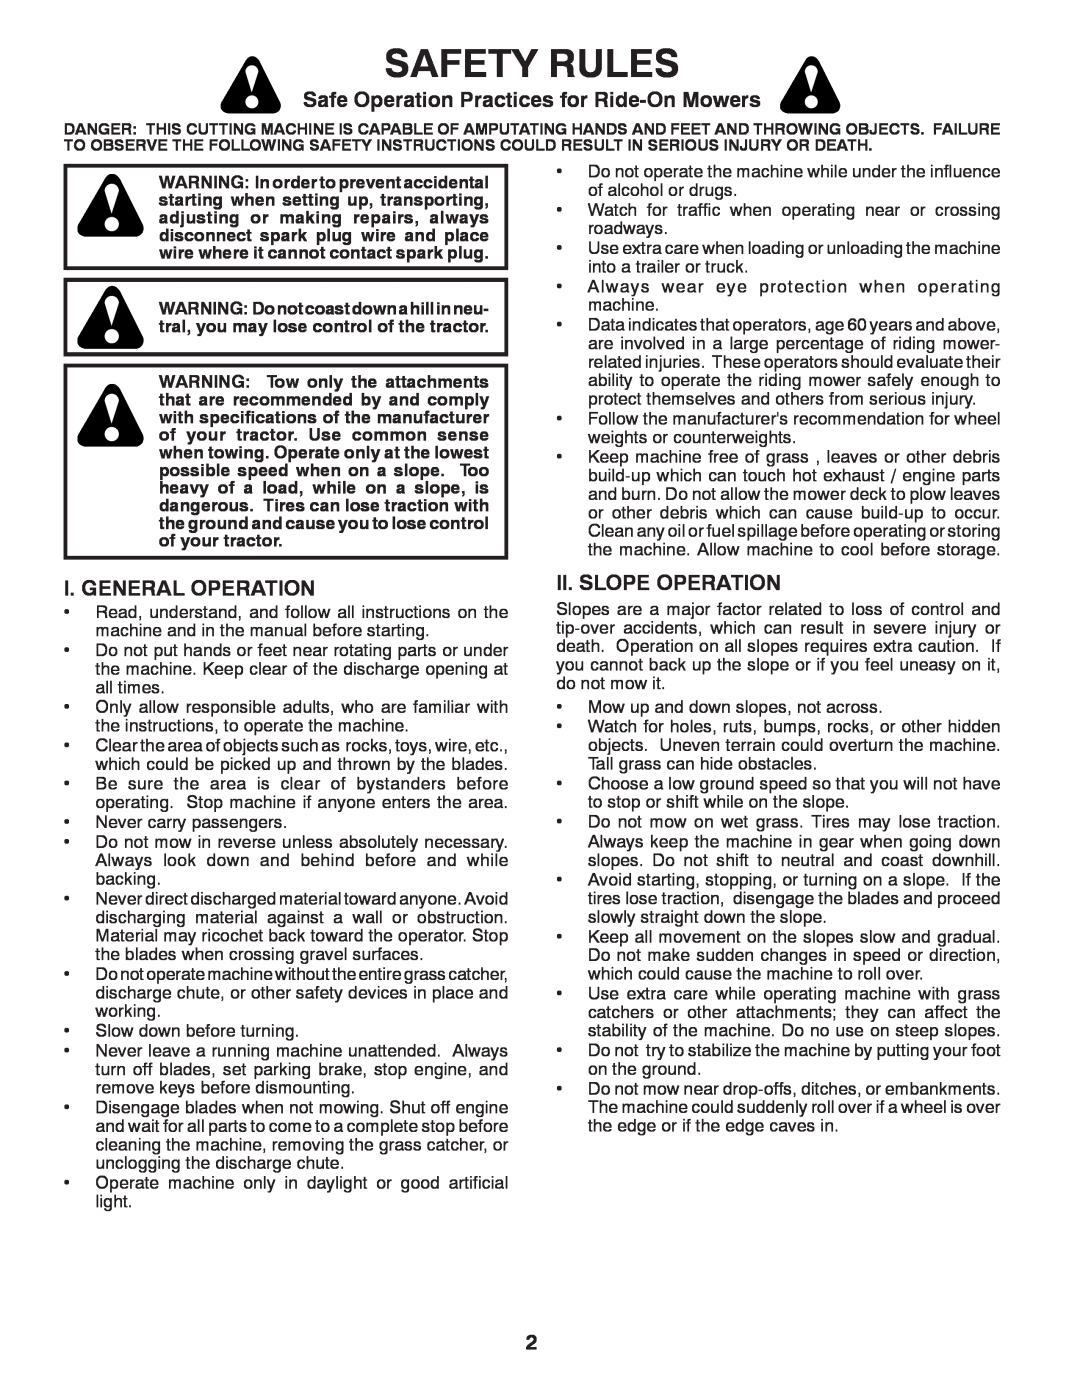 McCulloch 96041018001 Safety Rules, Safe Operation Practices for Ride-On Mowers, I. General Operation, Ii. Slope Operation 